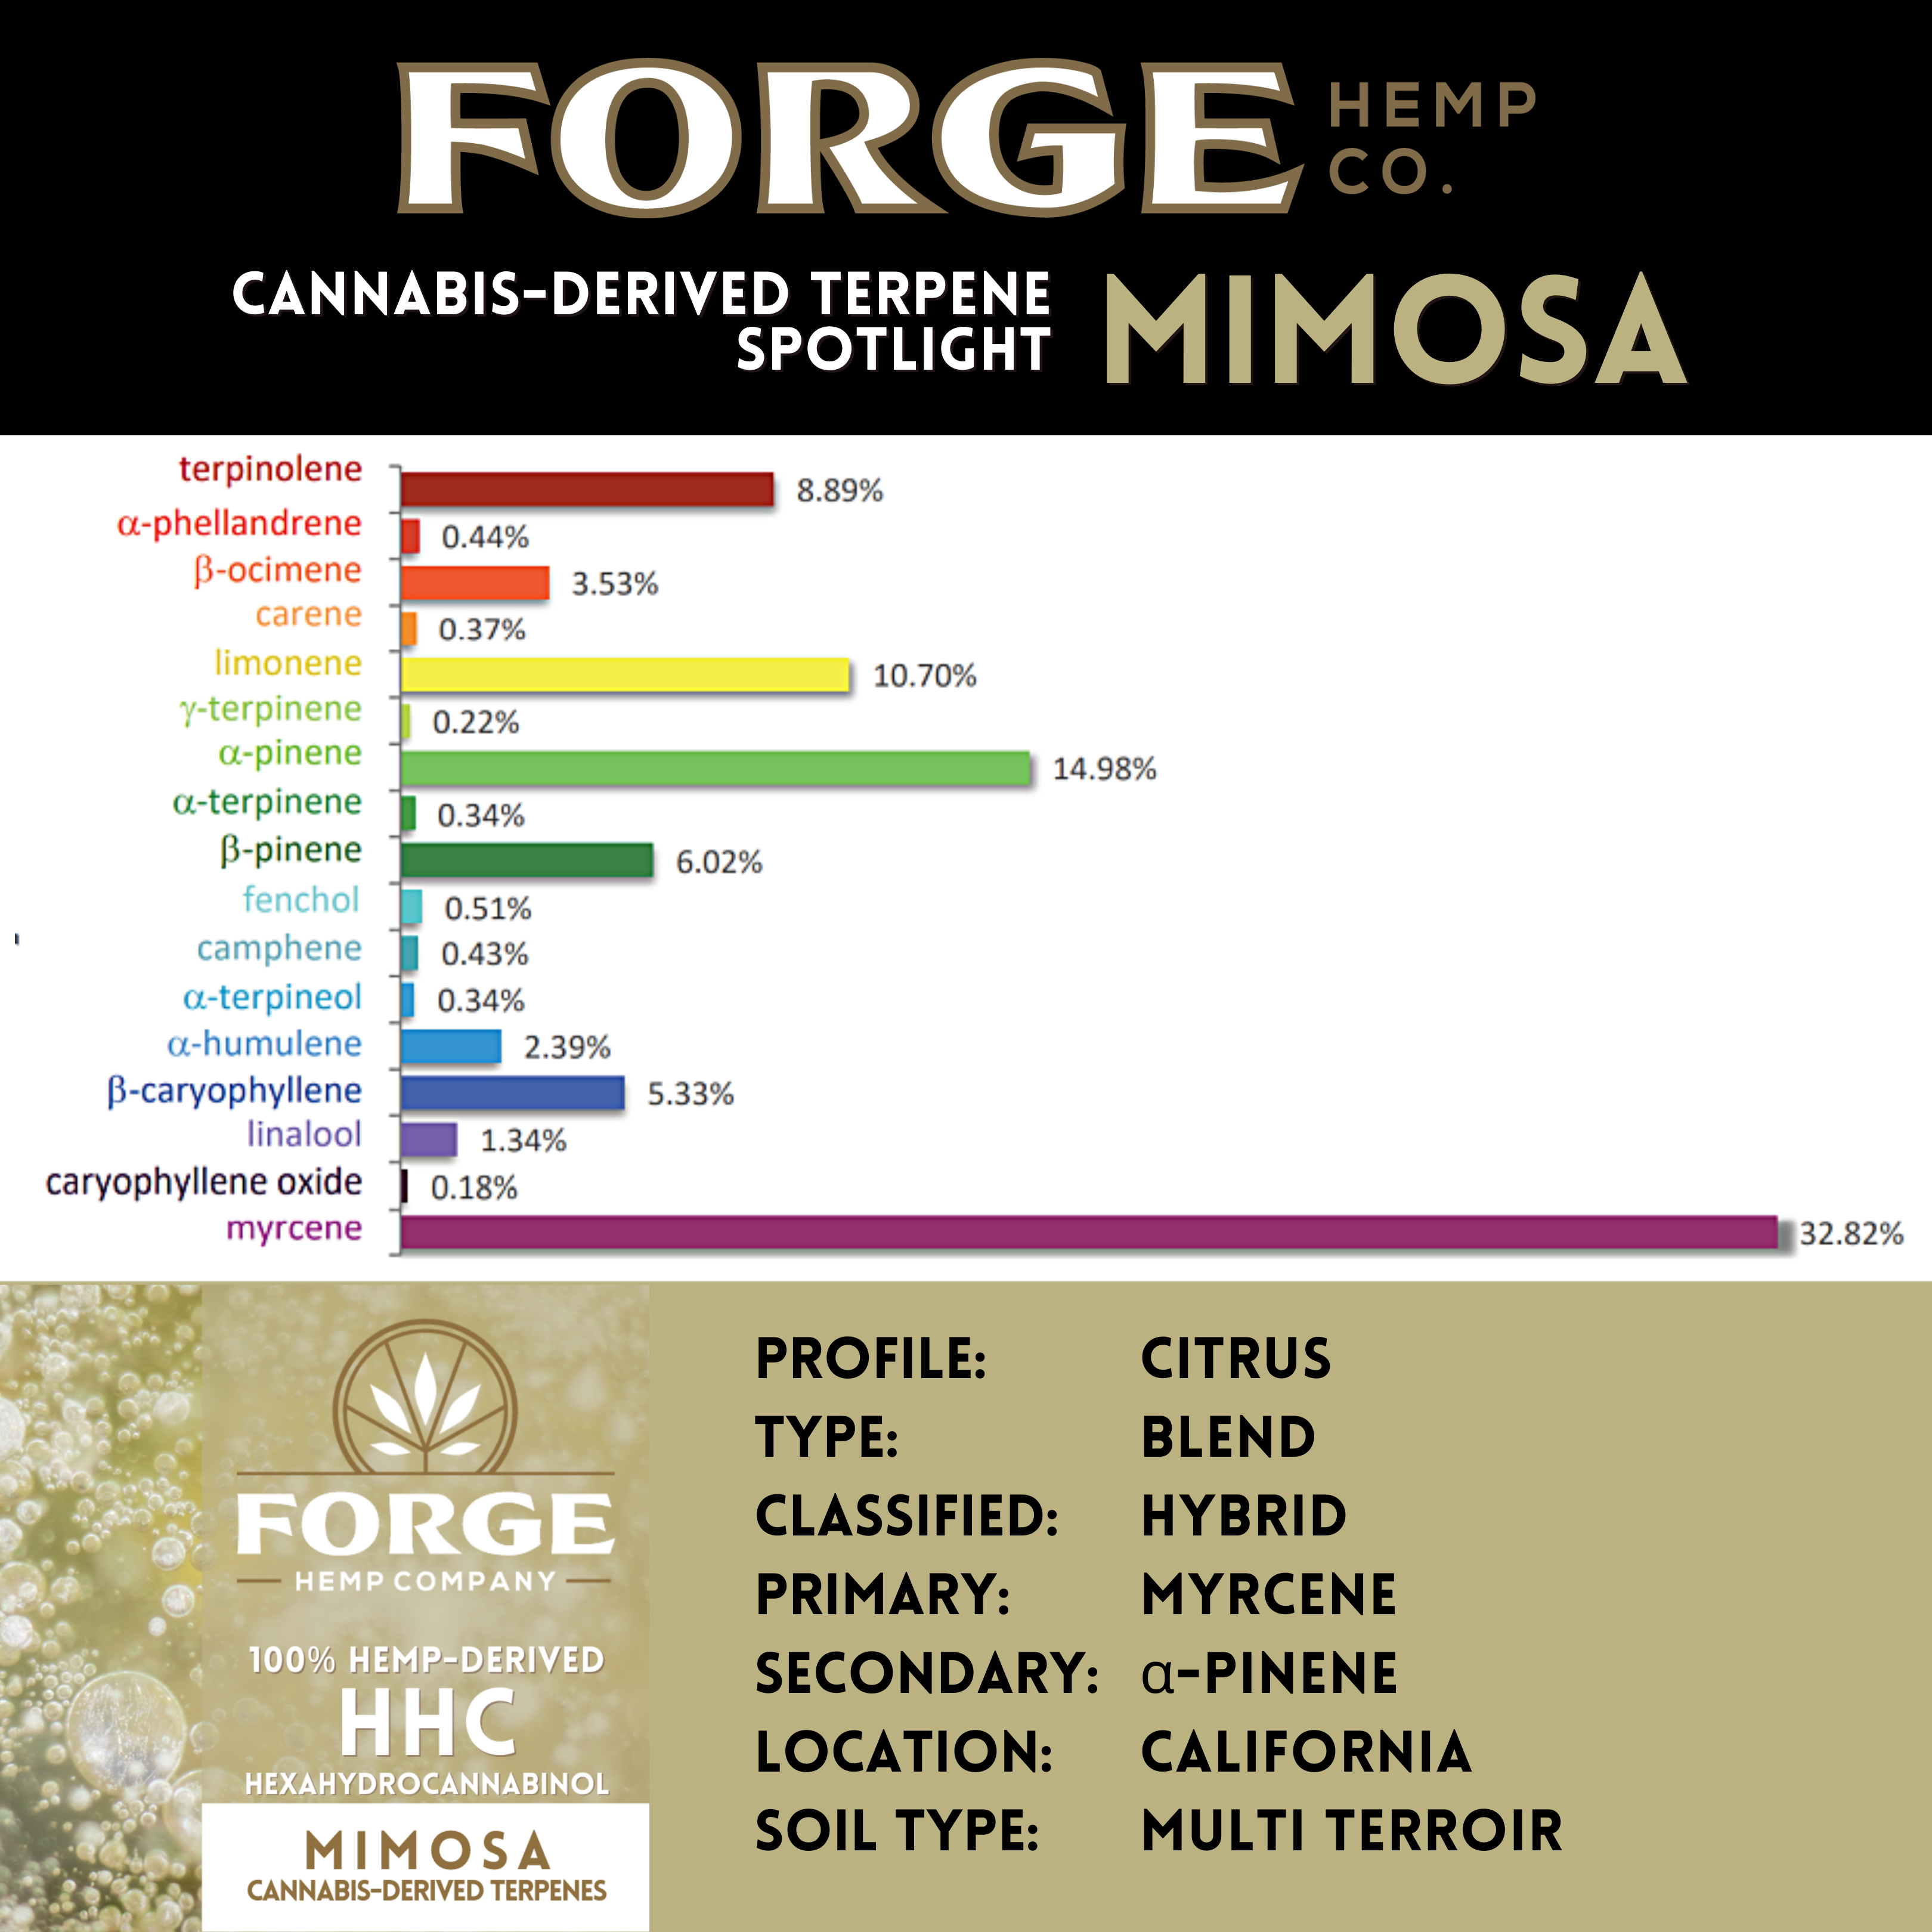 Mimosa CDTs in HHC